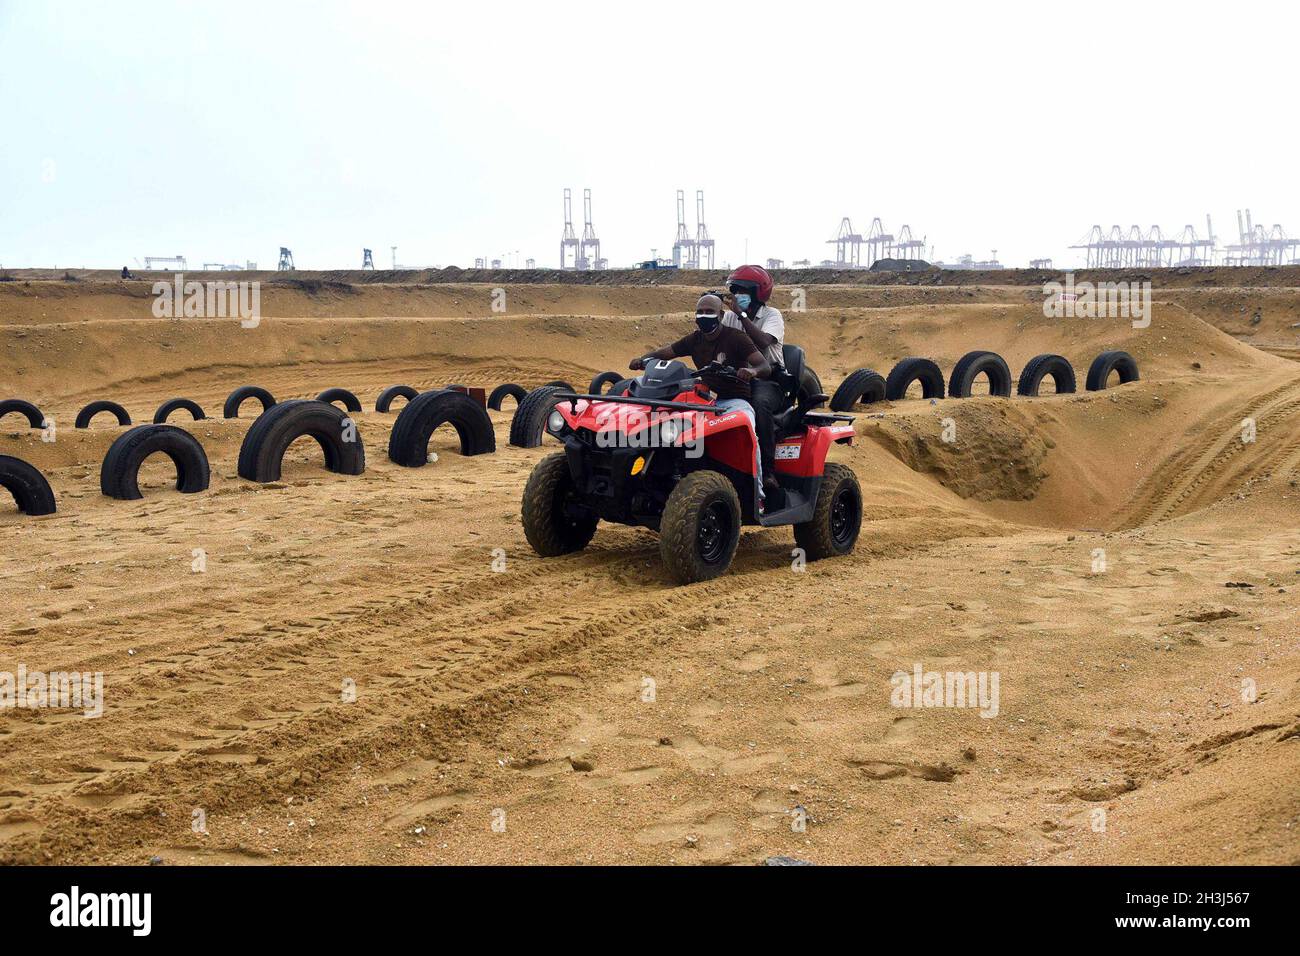 Colombo, Sri Lanka. 28th Oct, 2021. Two men drive on the track at the  ALL-Terrain Vehicle (ATV) entertainment center in Colombo Port City, Sri  Lanka, Oct. 28, 2021. Sri Lanka's first sand-based